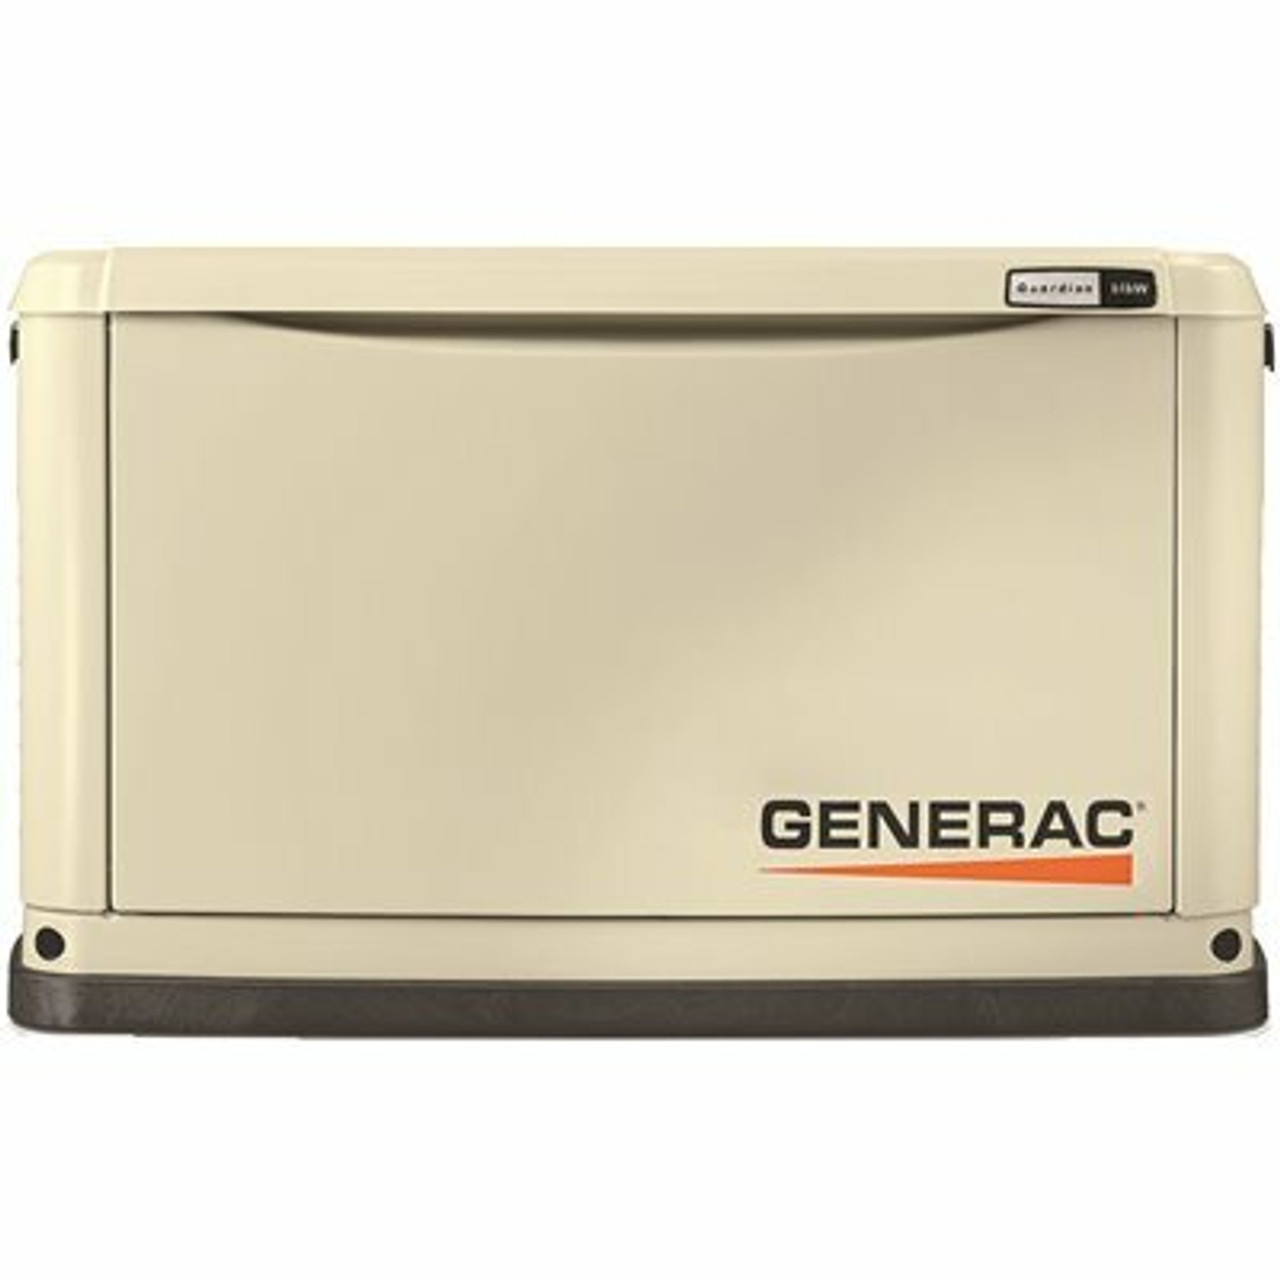 Generac Guardian 14,000-Watt Air-Cooled Whole House Generator With Wi-Fi And 200-Amp Transfer Switch